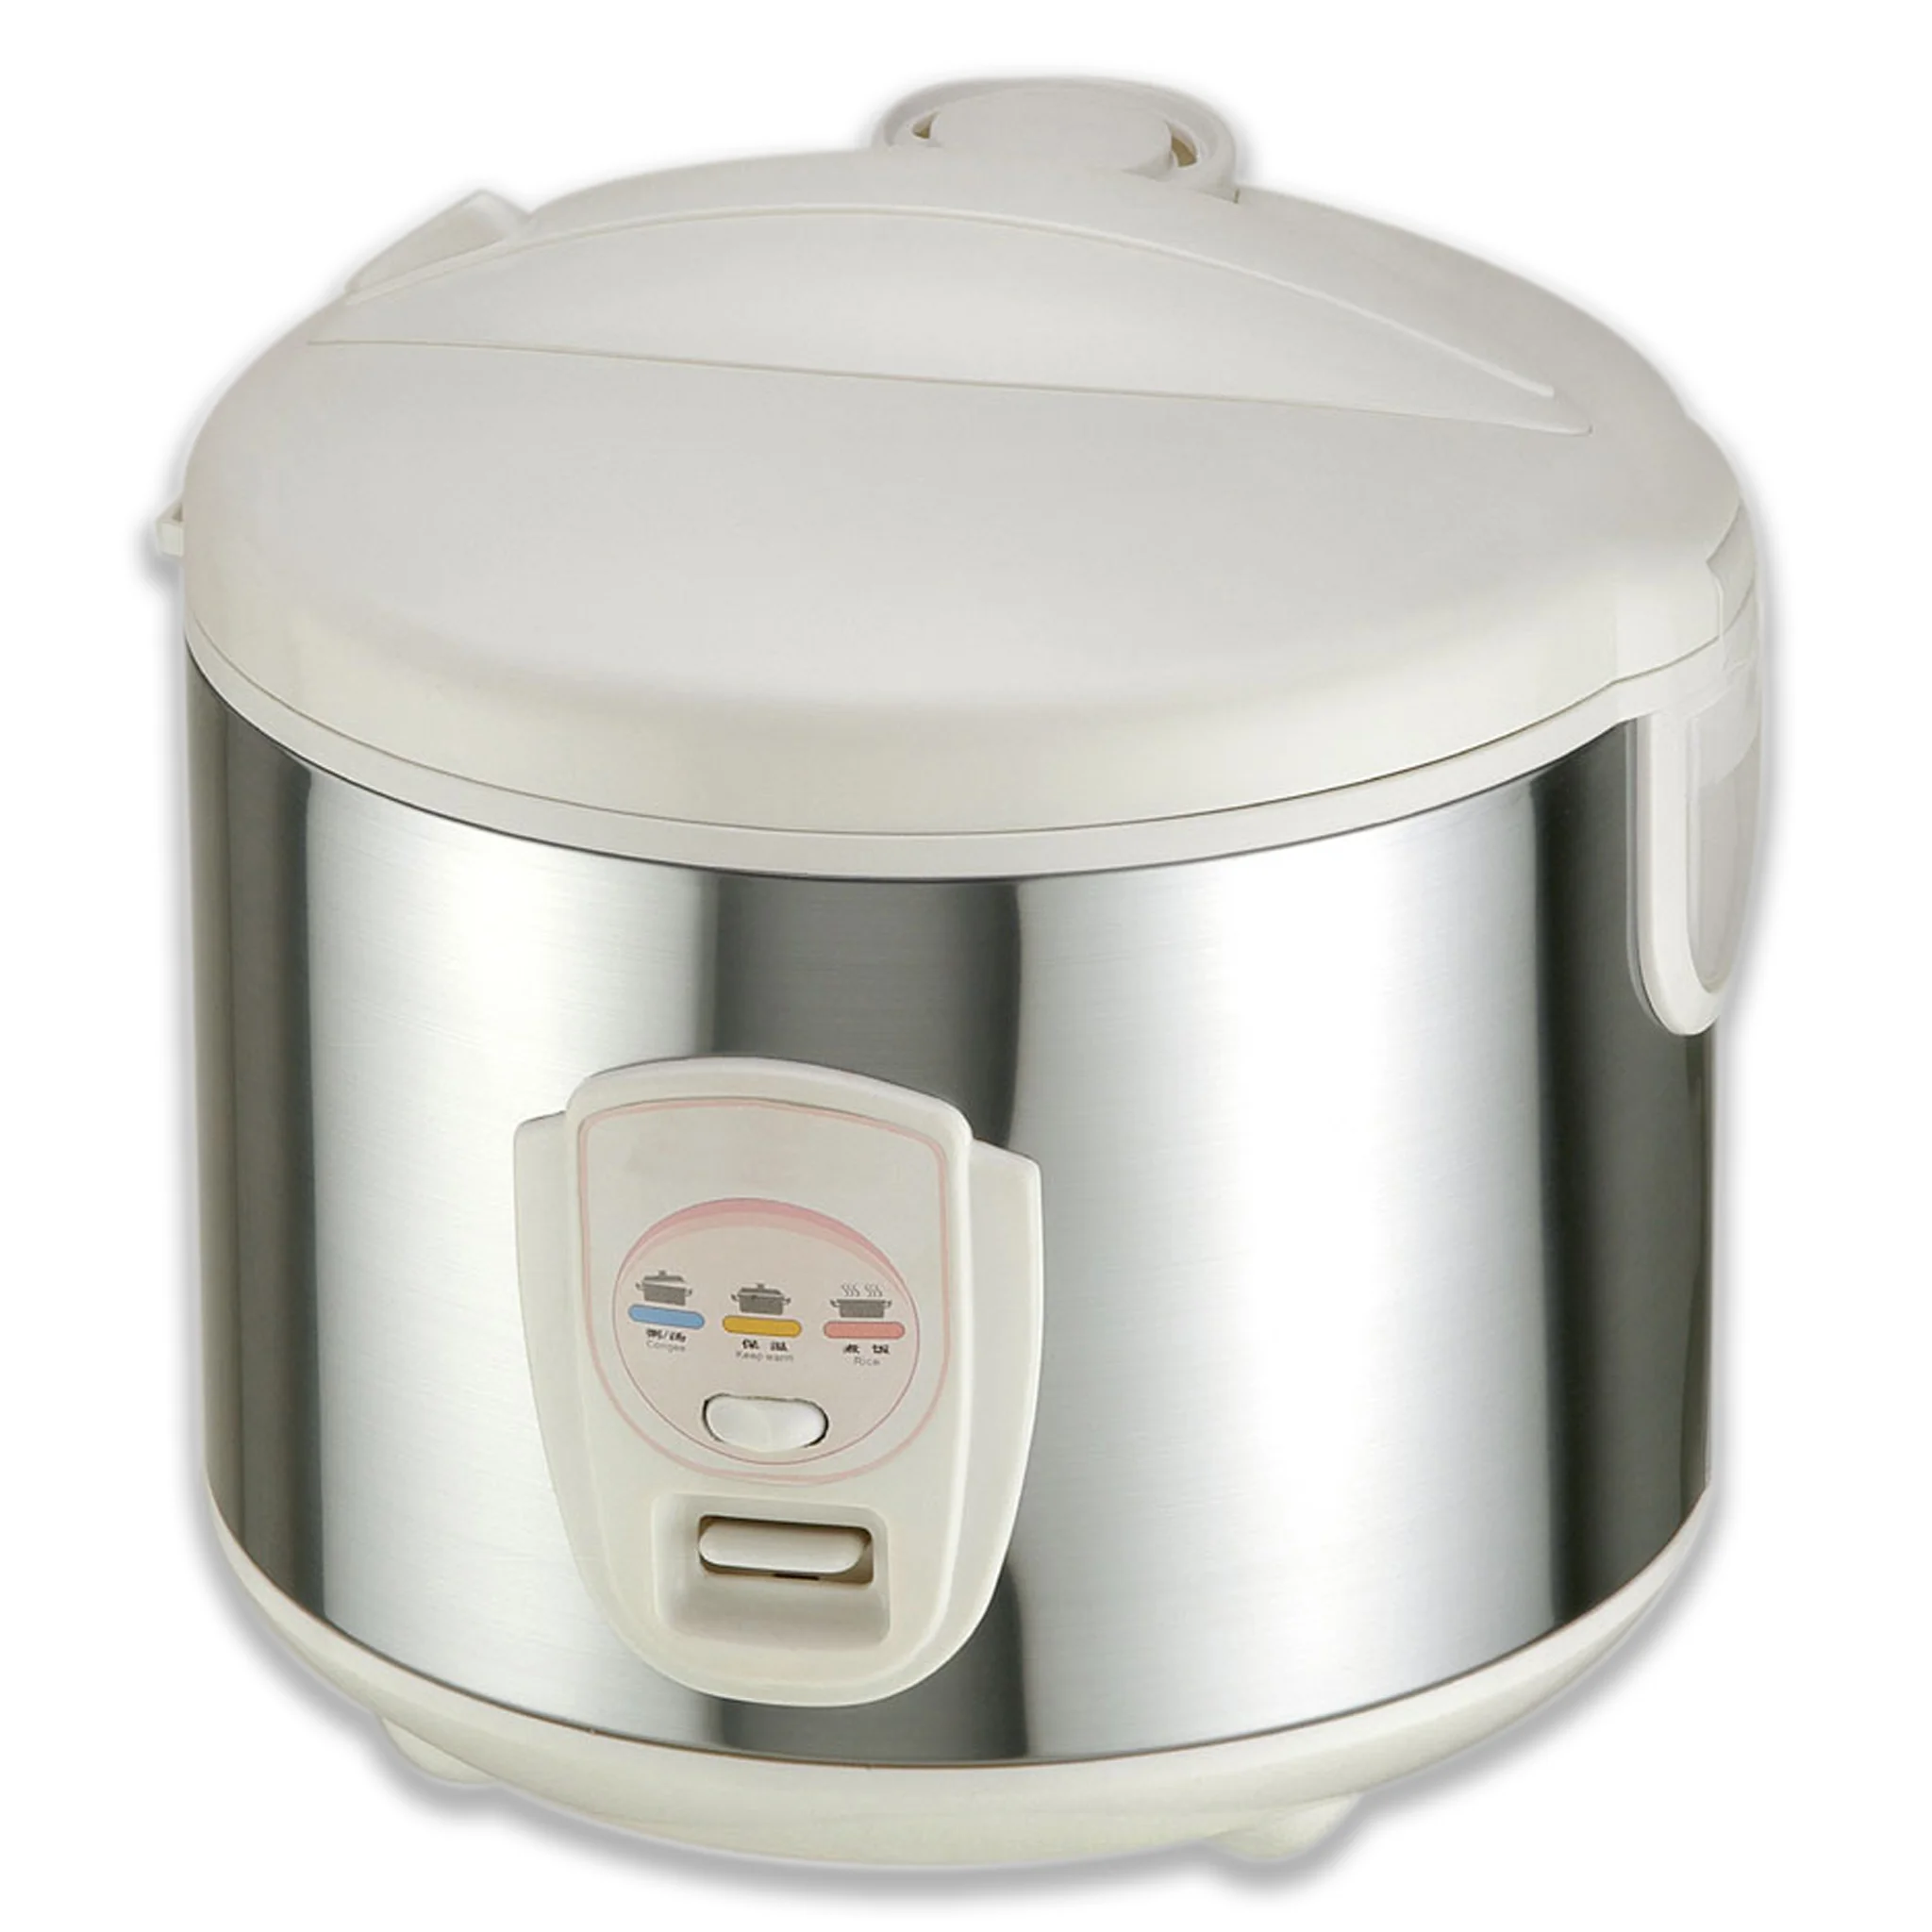 Deluxe midea rice cooker electric thermostat